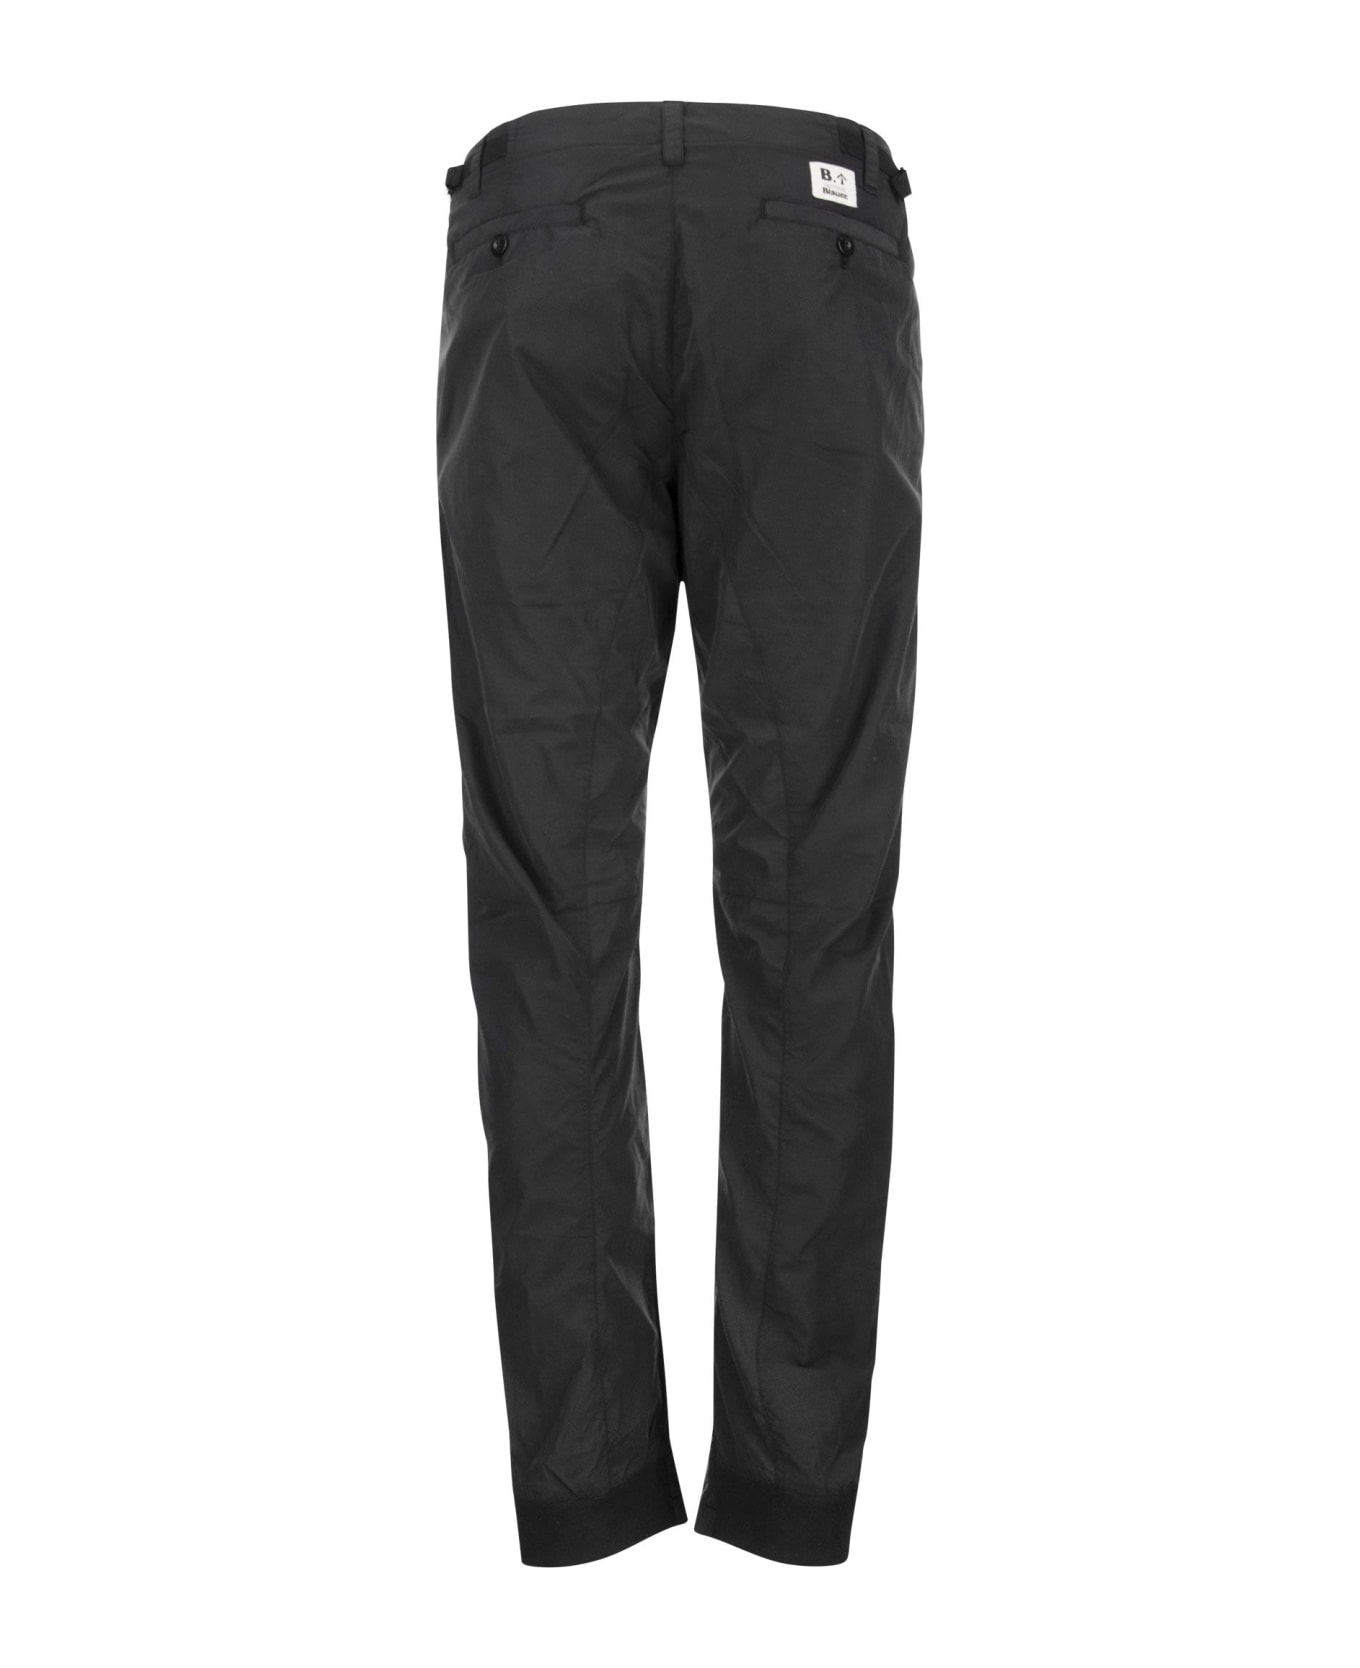 Blauer Trousers In Technical Fabric - Black ボトムス